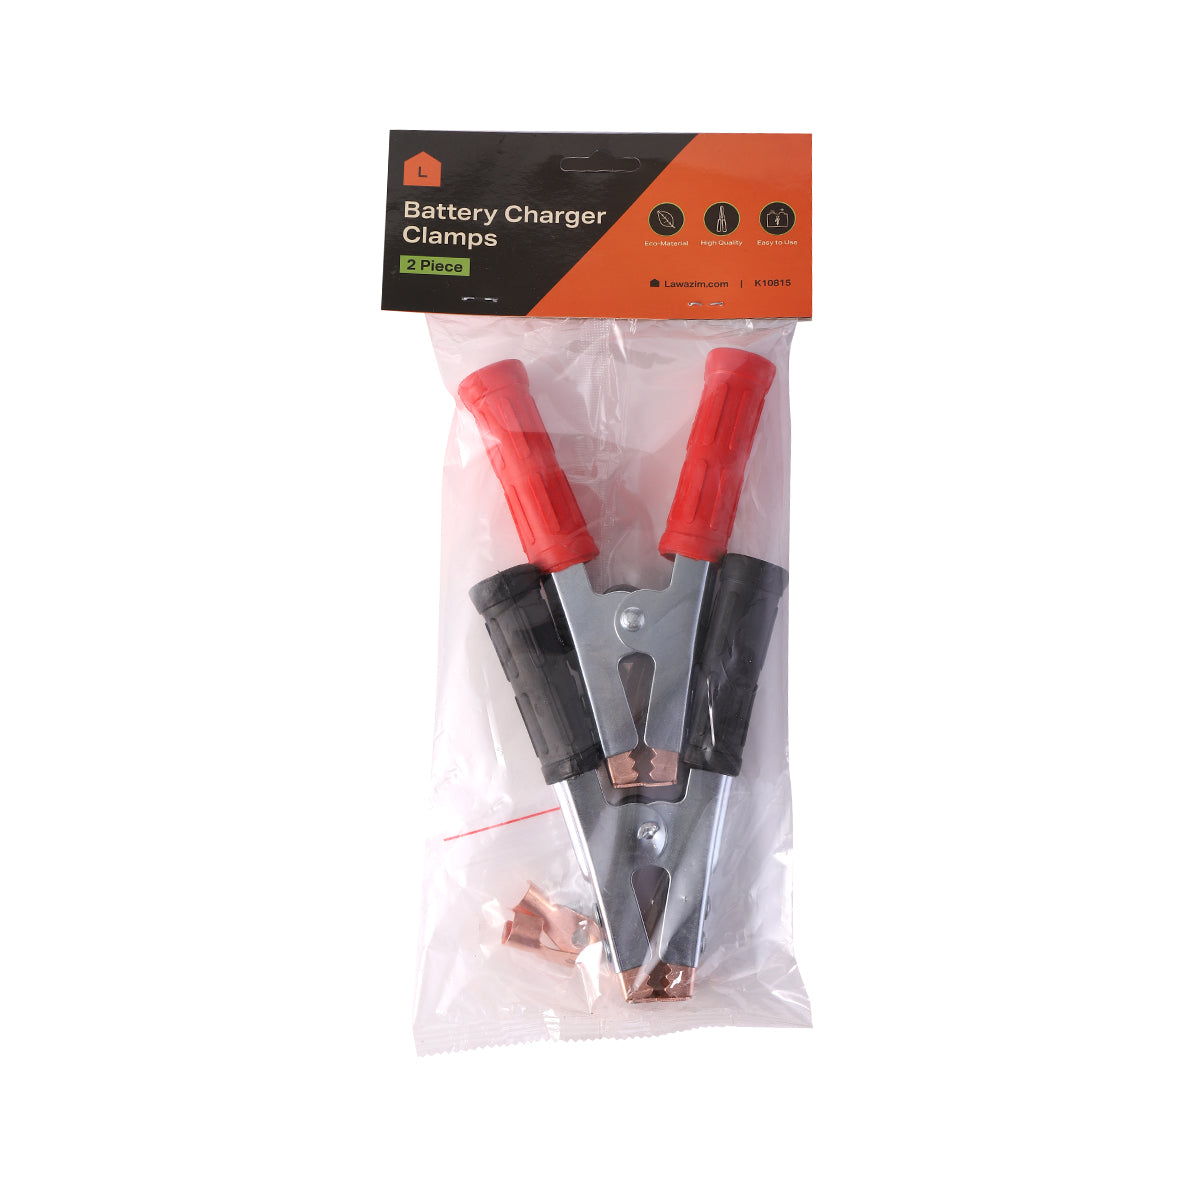 2-Piece Car Jumper Charger Clamps